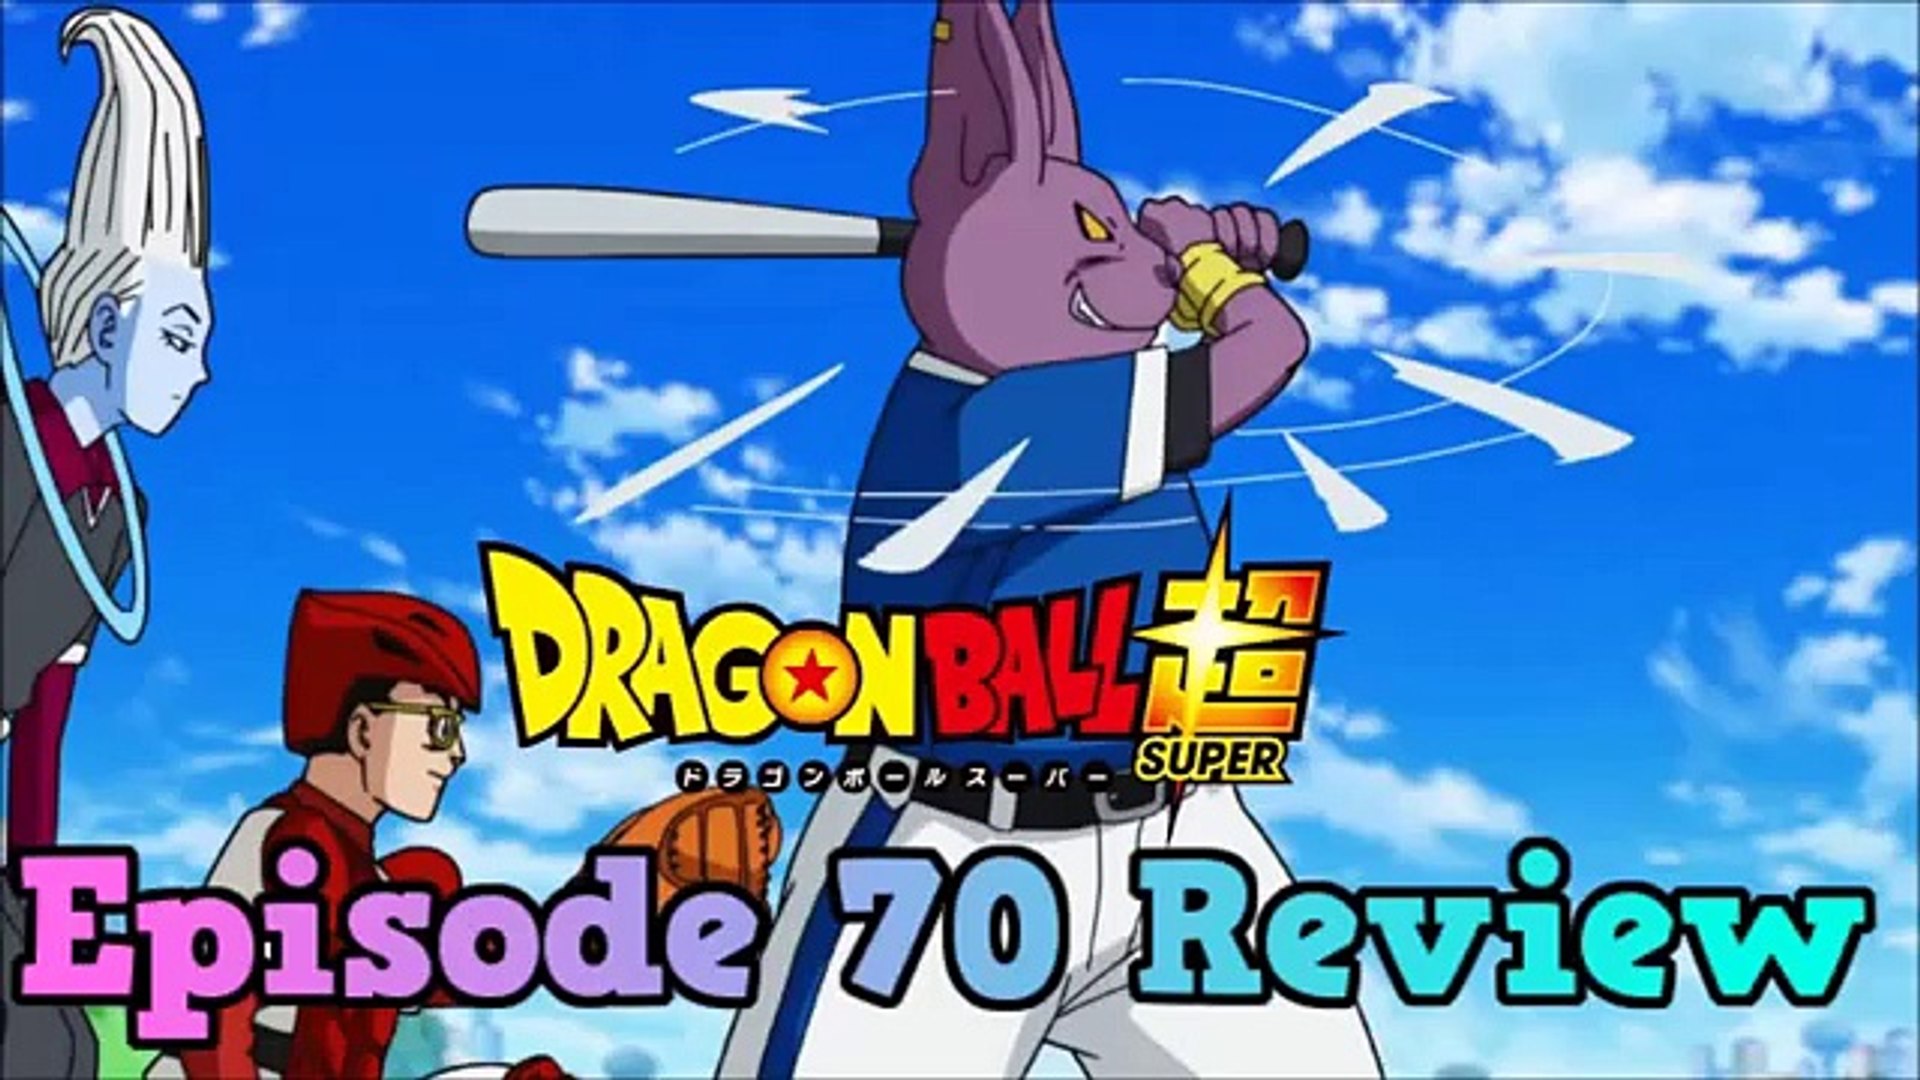 Dragon Ball Super Episode 70 Review: Champa's Challenge! This Time Let's  Face Off in Baseball!! - Dailymotion Video